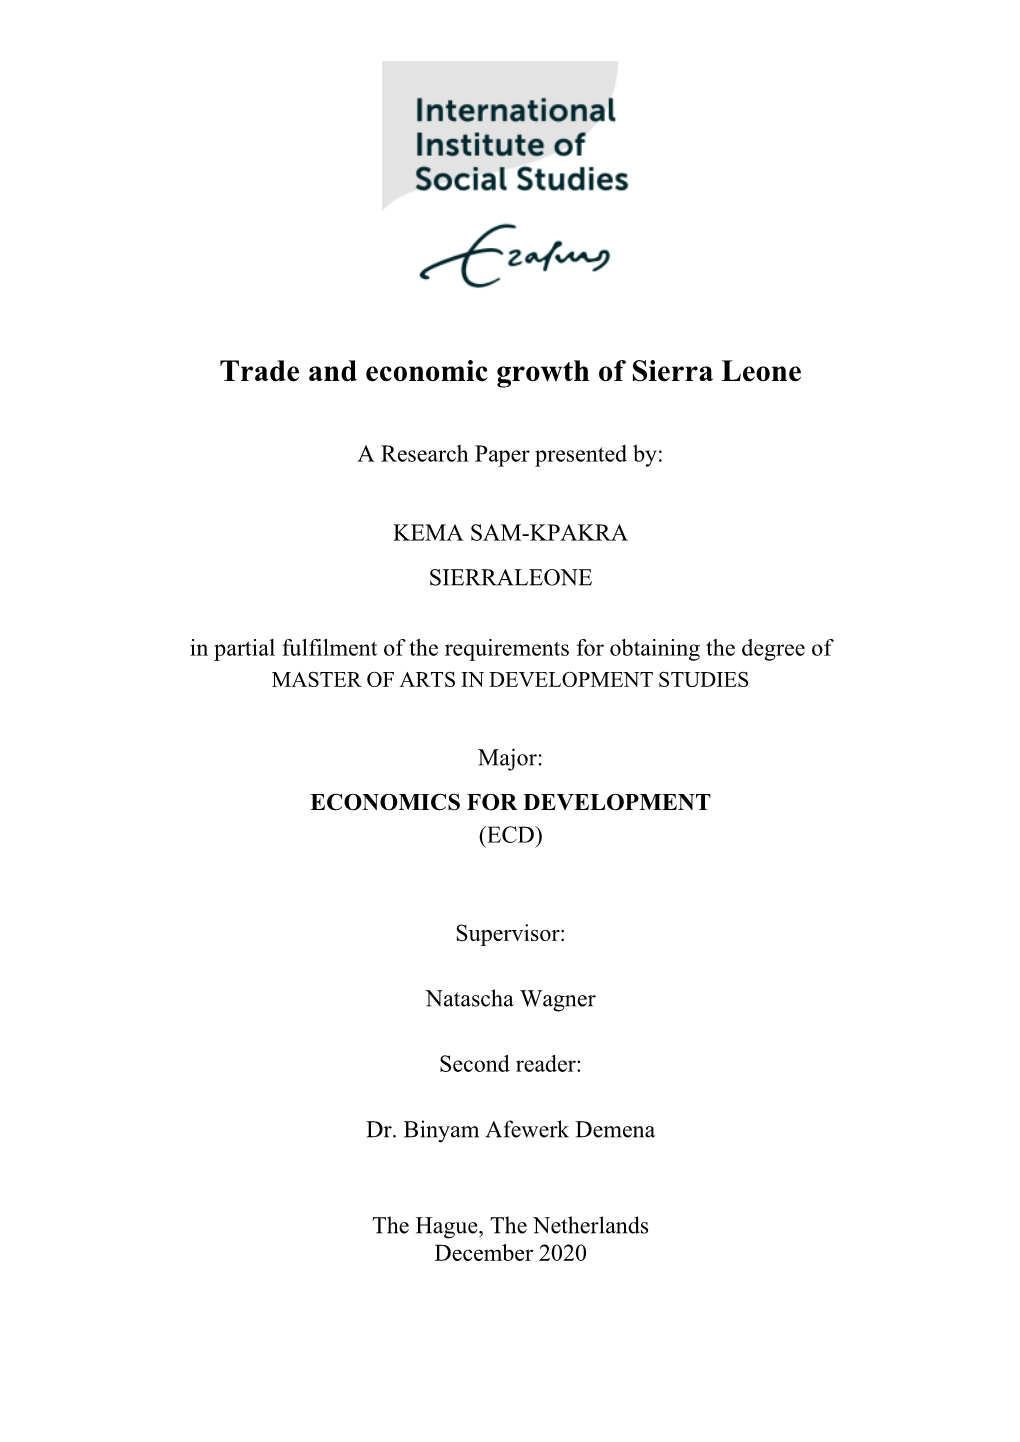 Trade and Economic Growth of Sierra Leone